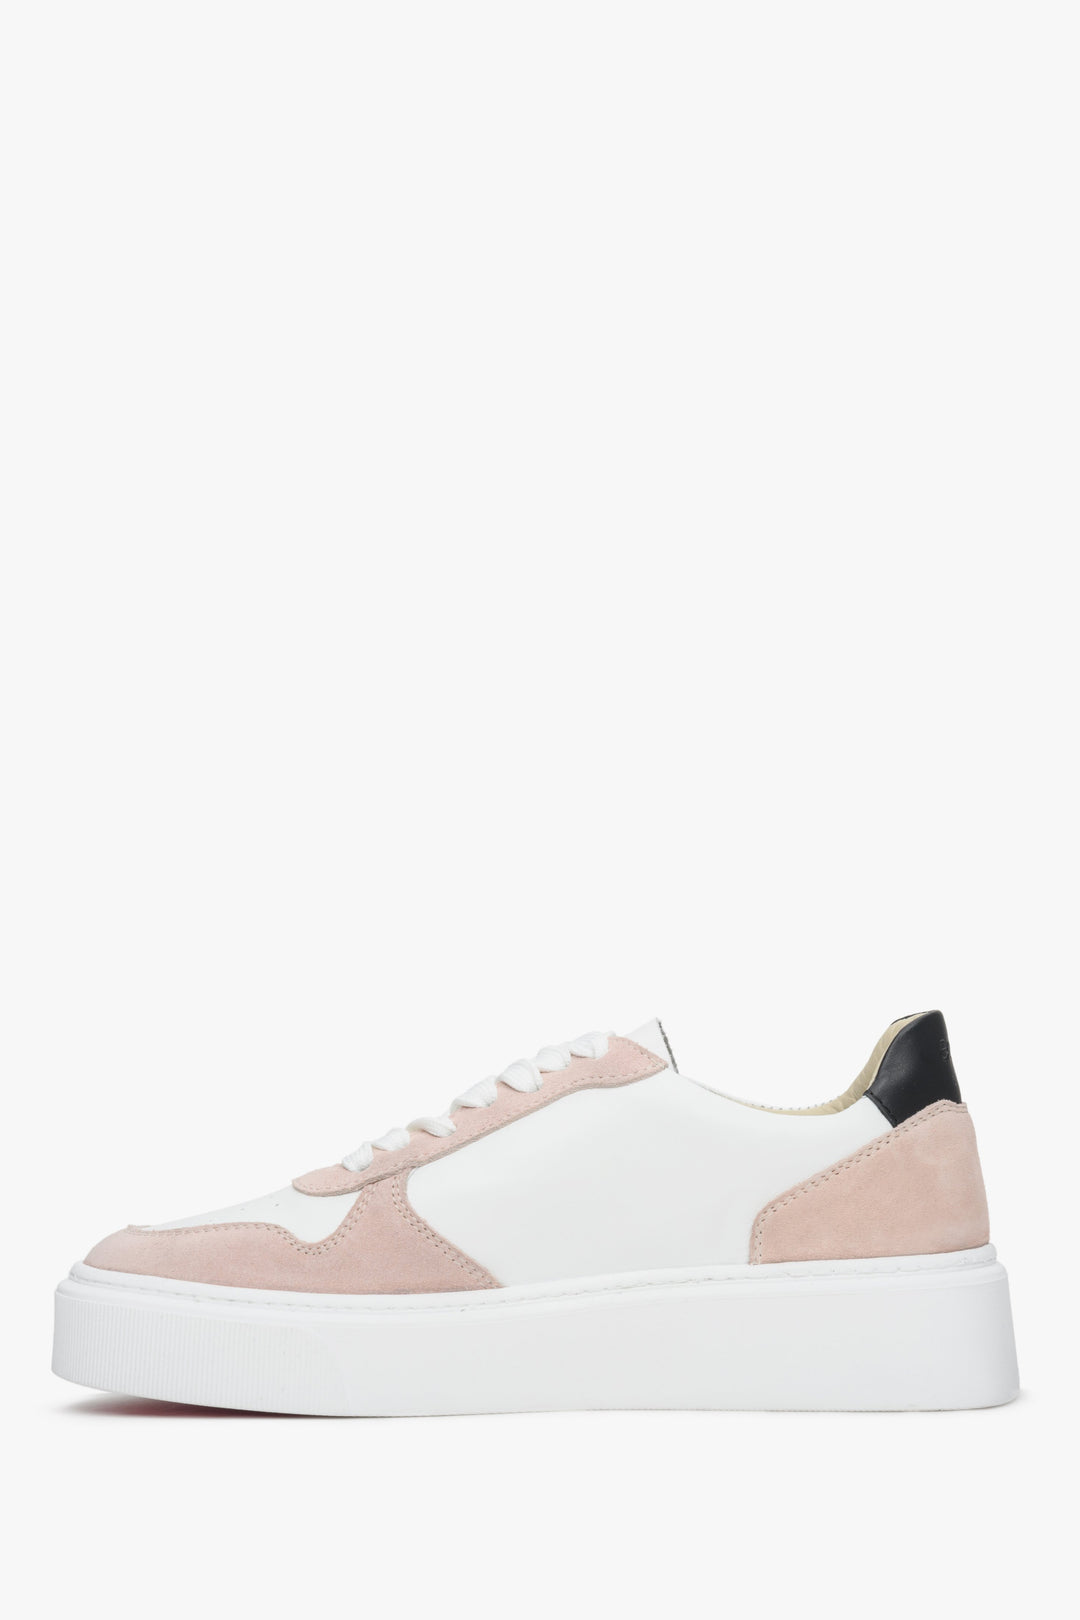 Women's sneakers made of combined materials, leather and velour in a shade of white and pink.